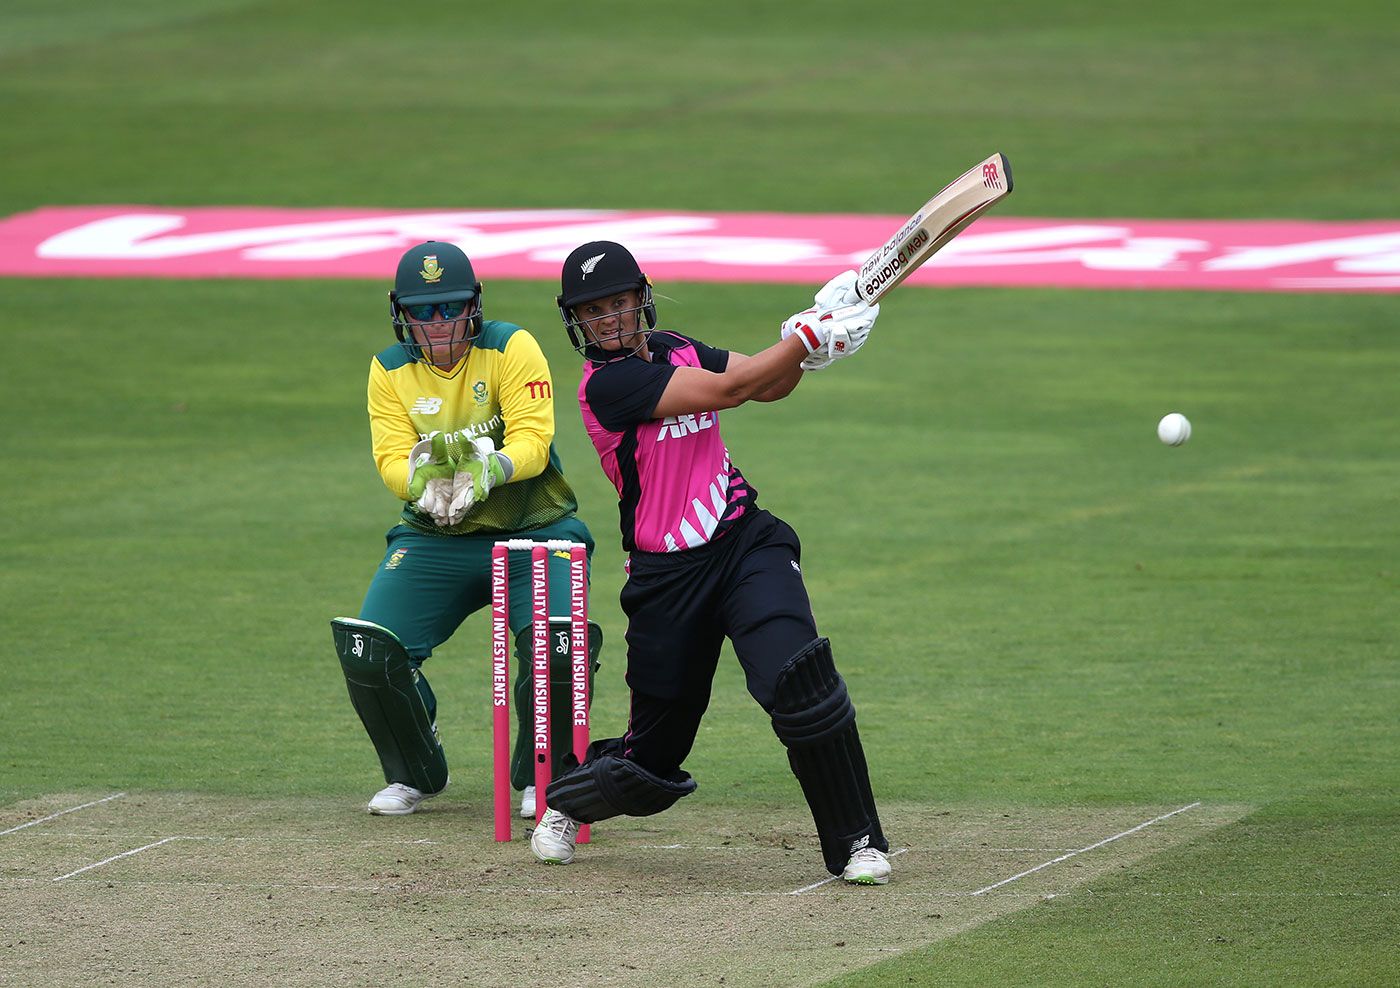 New Zealand beat South Africa by 69-runs in women’s T20 - Sports Leo